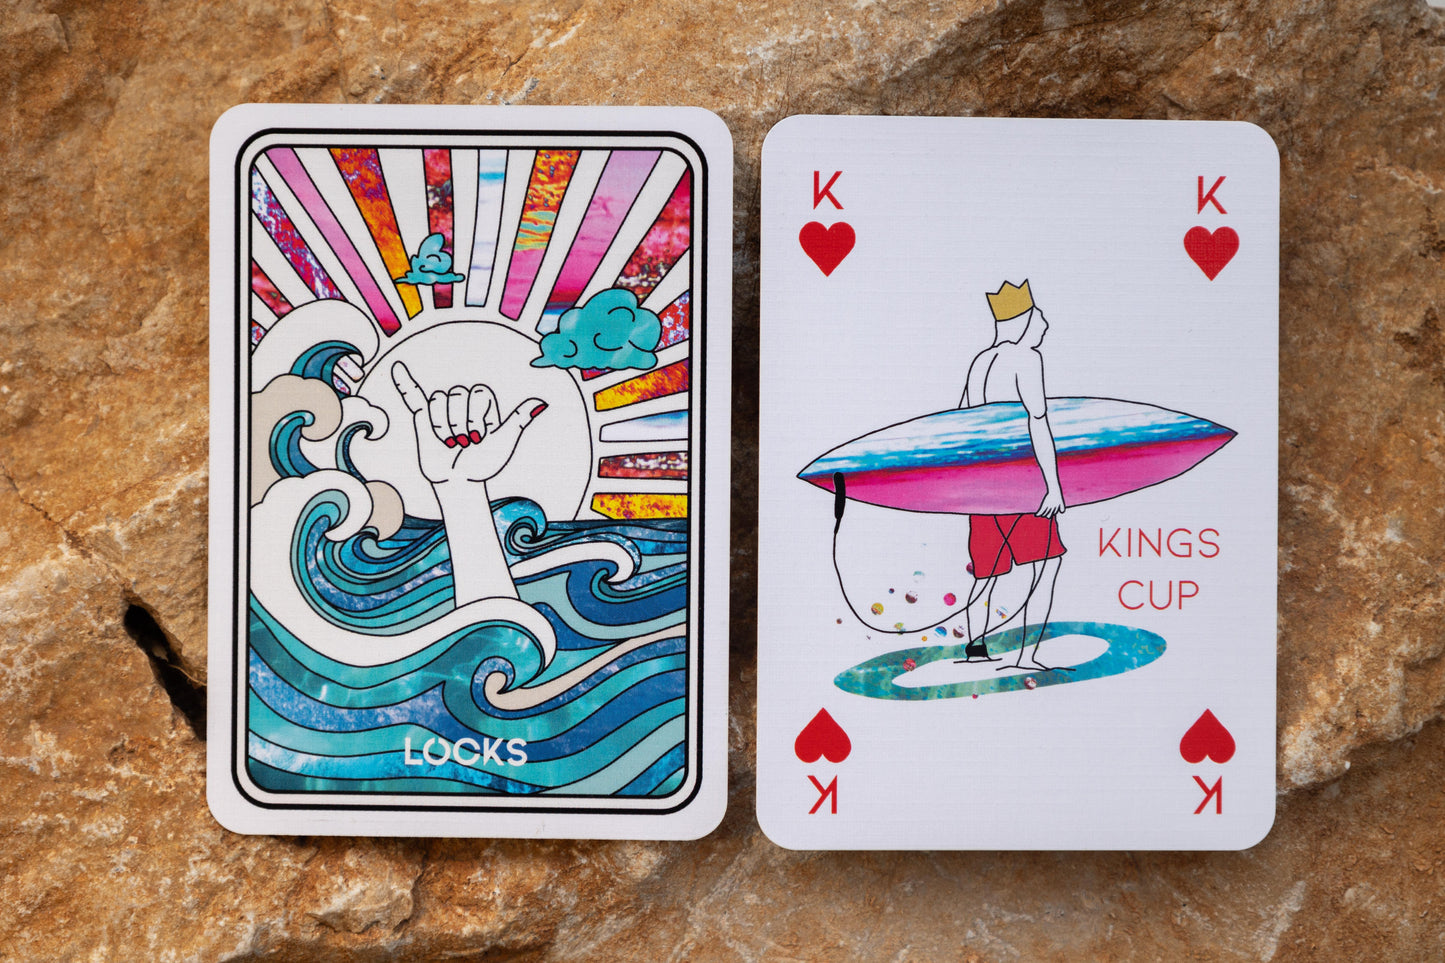 SURF CUP Poker cards